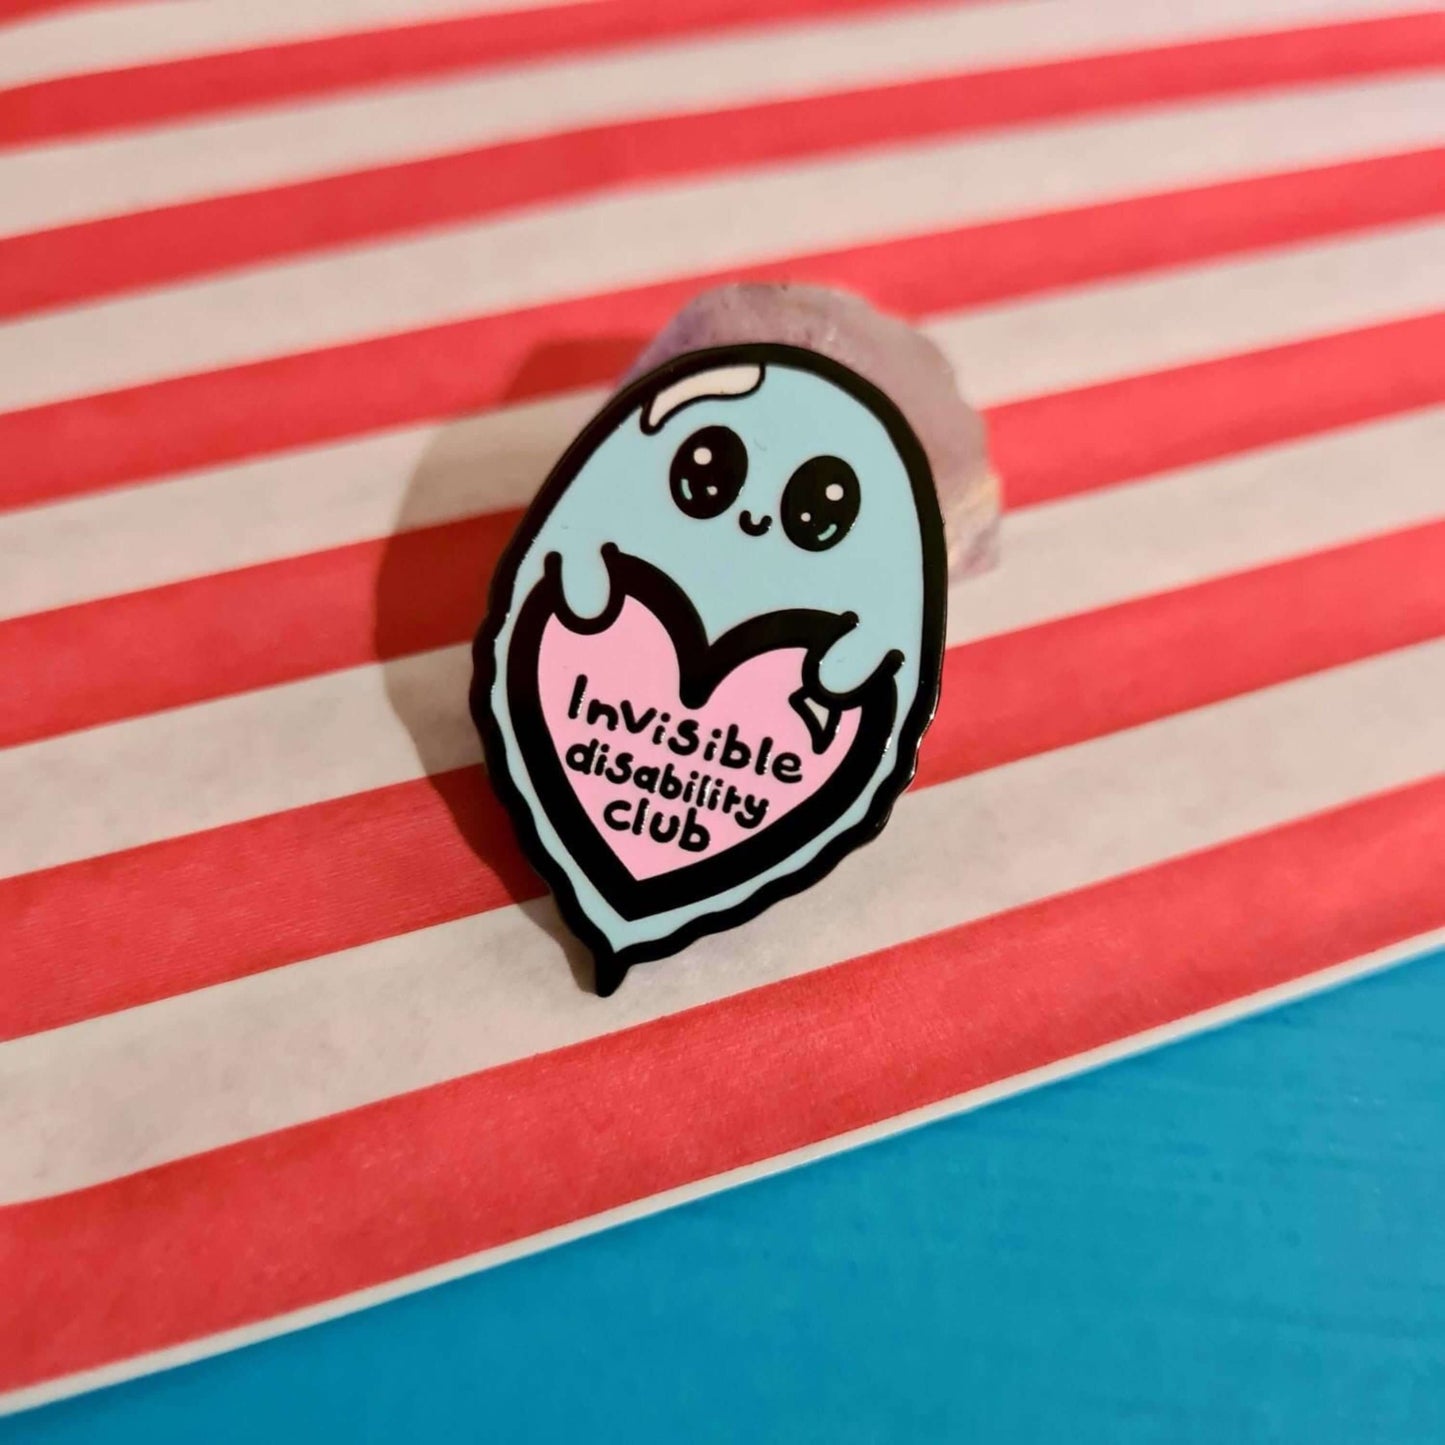 Invisible Disability Club Enamel Pin shown on a red and white striped paper bag on a blue background. The enamel pin is of a cute smiling ghost holding a pink heart with text saying invisible disability club. The enamel pin is designed to raise awareness for hidden and chronic disabilities